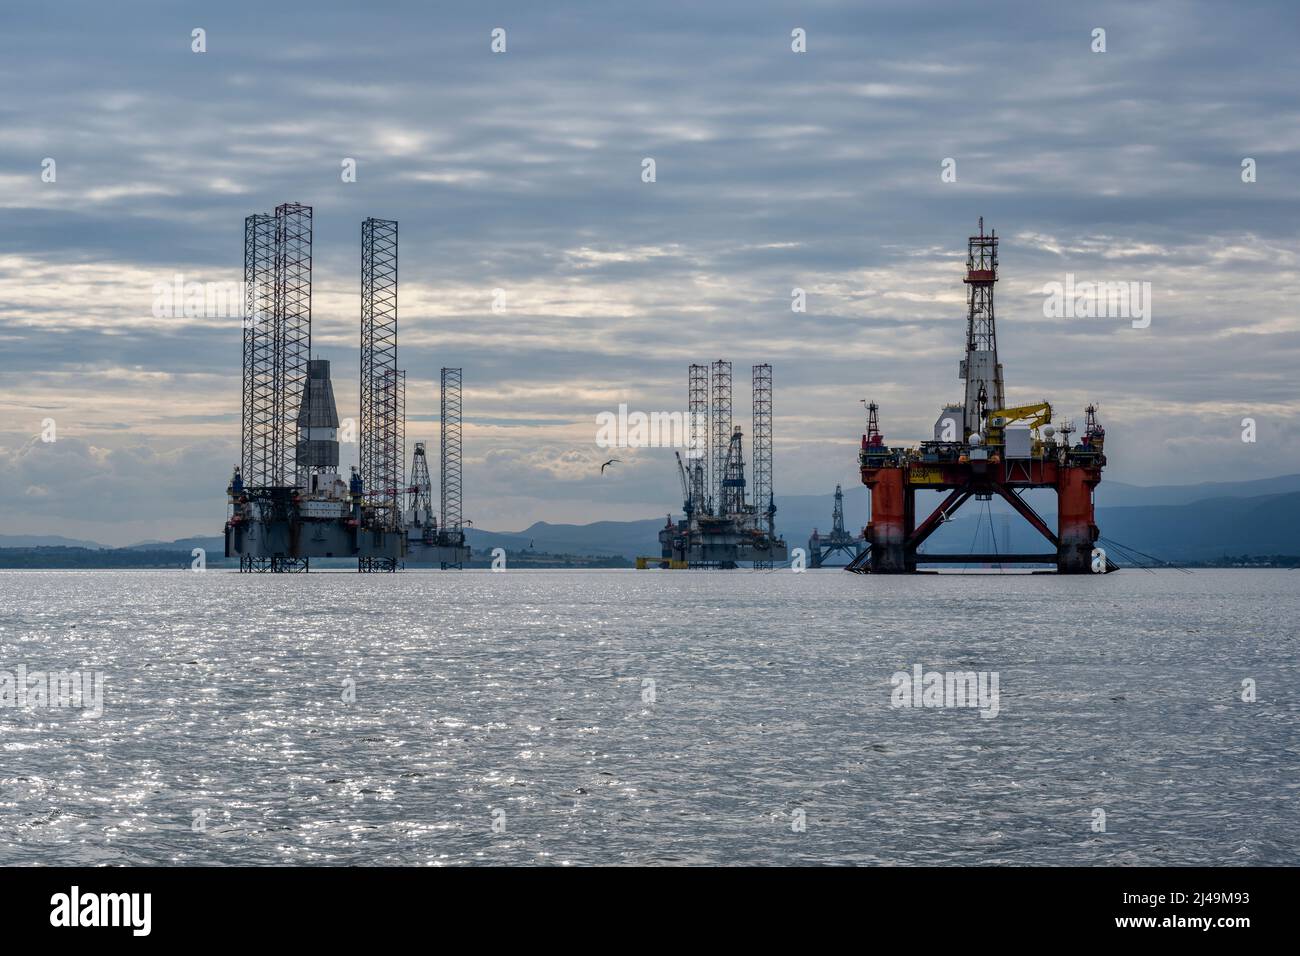 Oil rigs / drilling platforms moored in Cromarty Firth in Ross and Cromarty, Highland, Scotland, UK Stock Photo